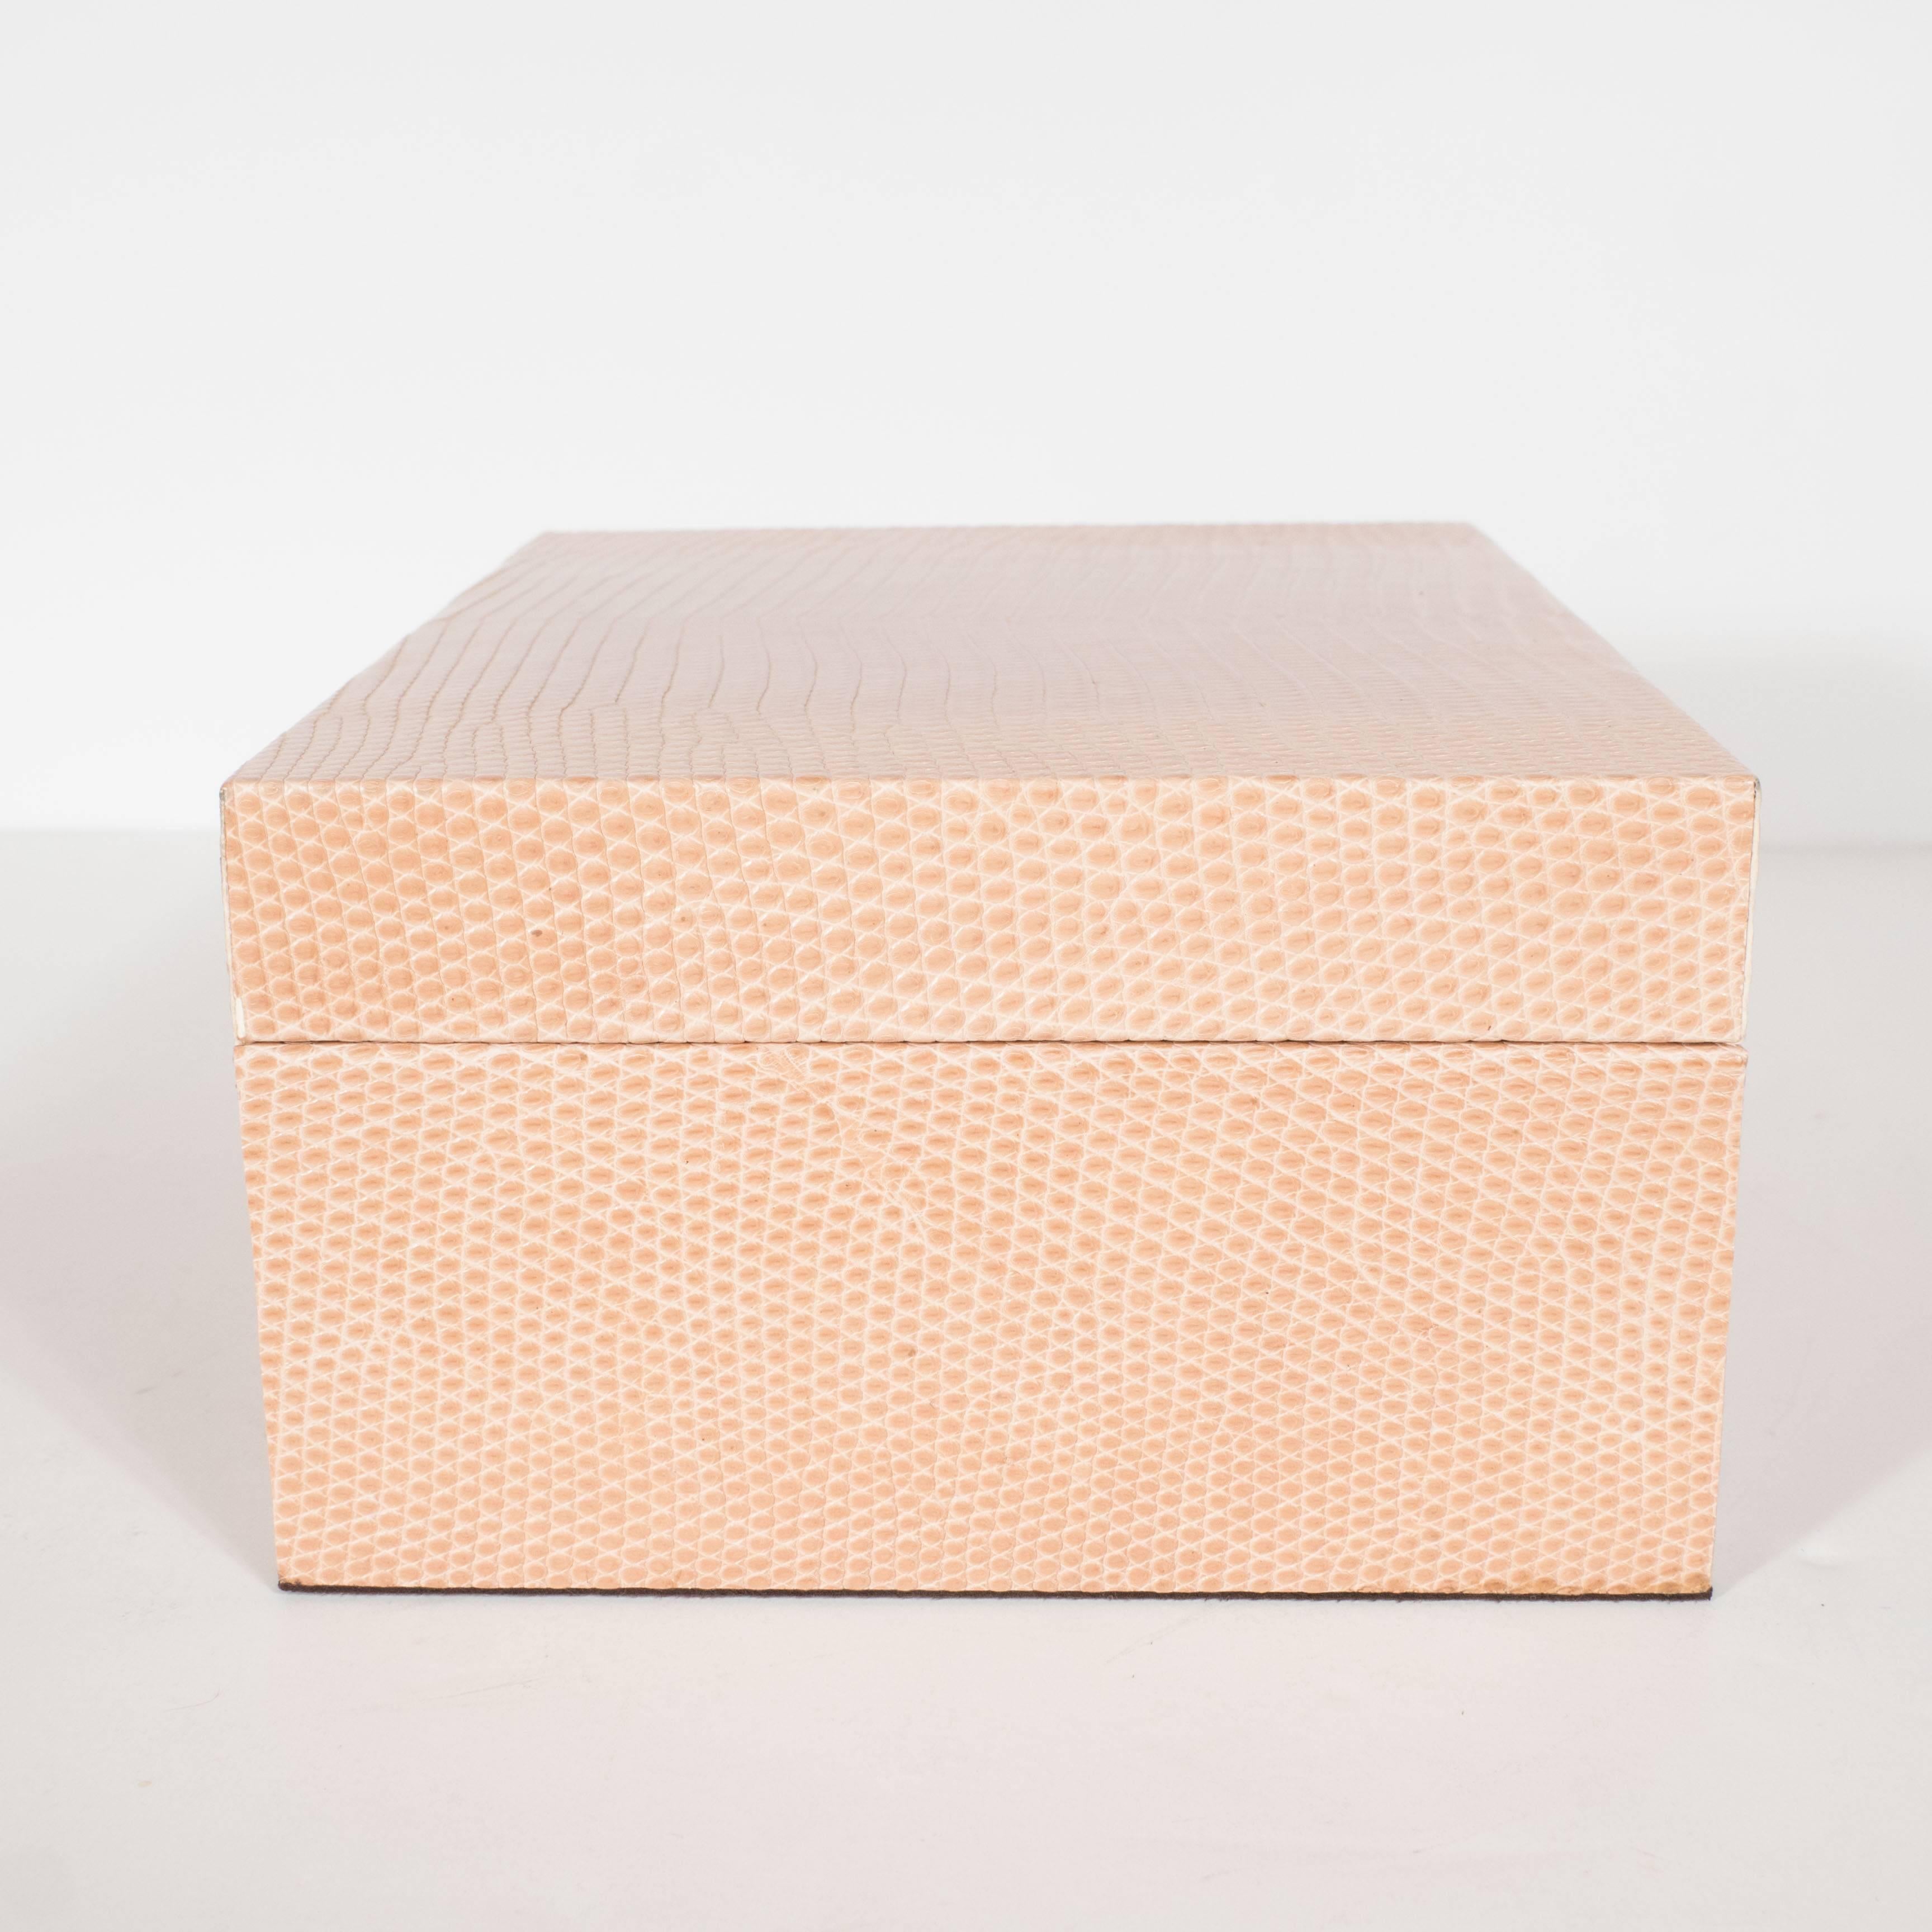 Animal Skin Chic Modernist Lizard Skin Wrapped Box in Natural Tones For Sale